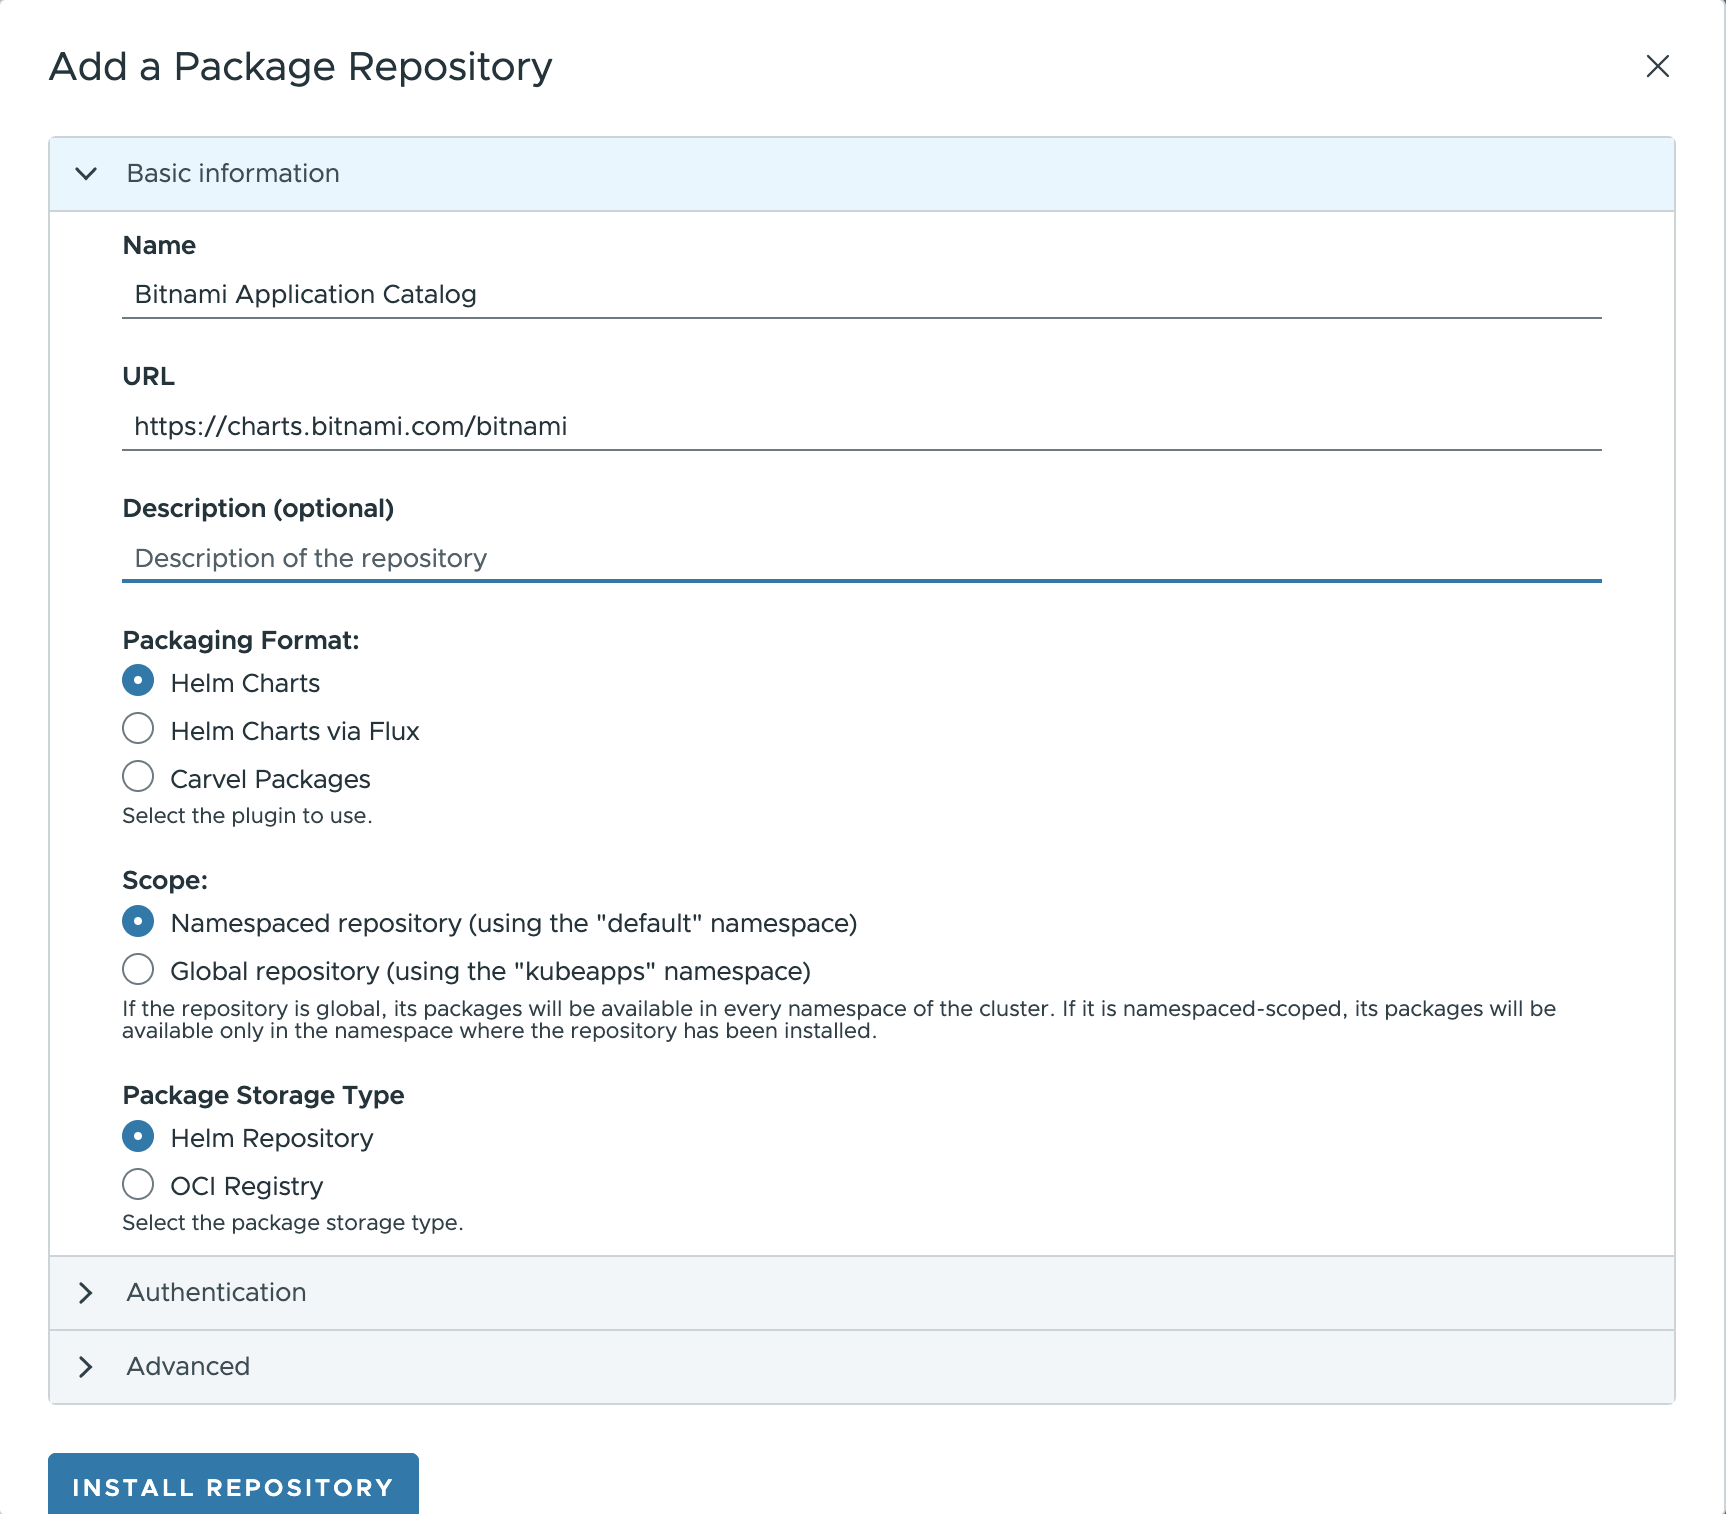 Add Package repository pop-up